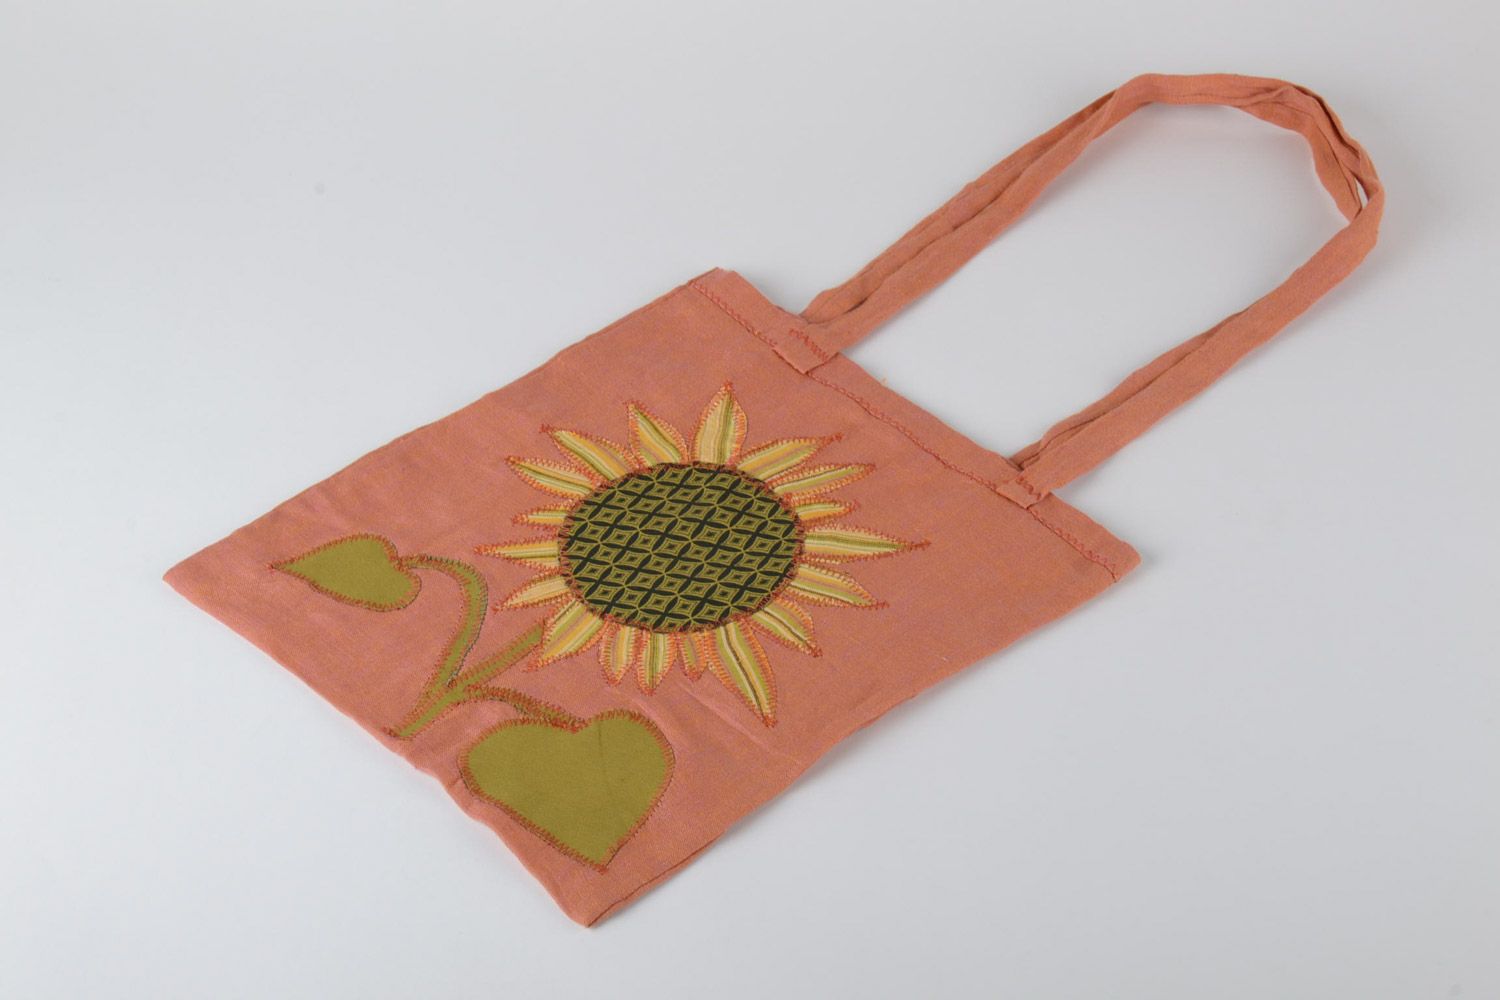 Handmade fabric ladies bag with applique work in the form of a large sunflower photo 2